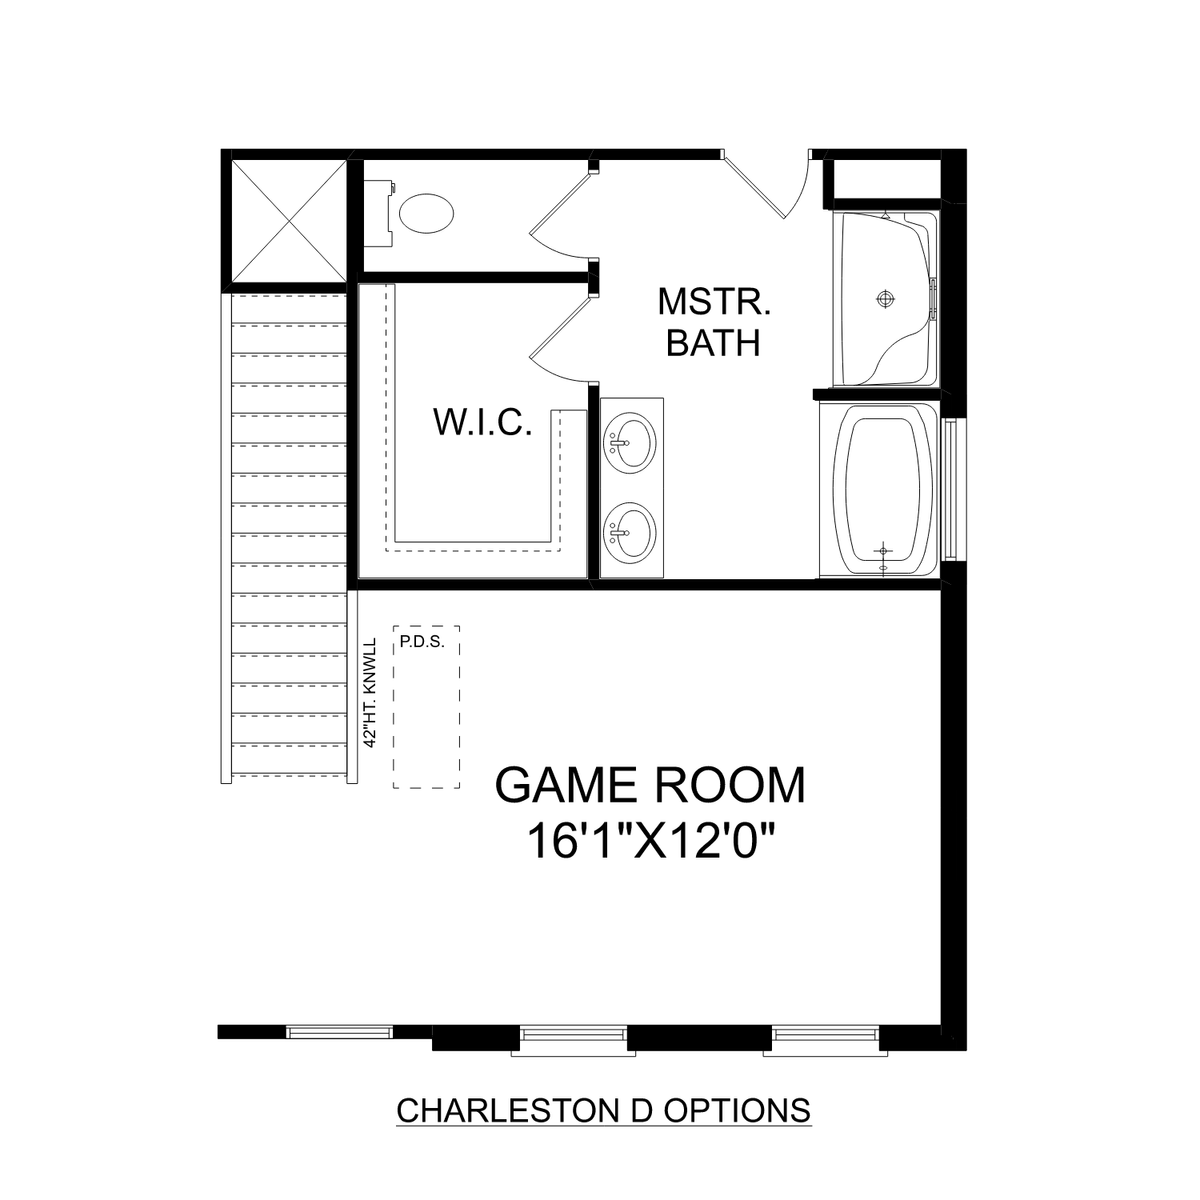 3 - The Charleston D buildable floor plan layout in Davidson Homes' Little Burwell Estates community.